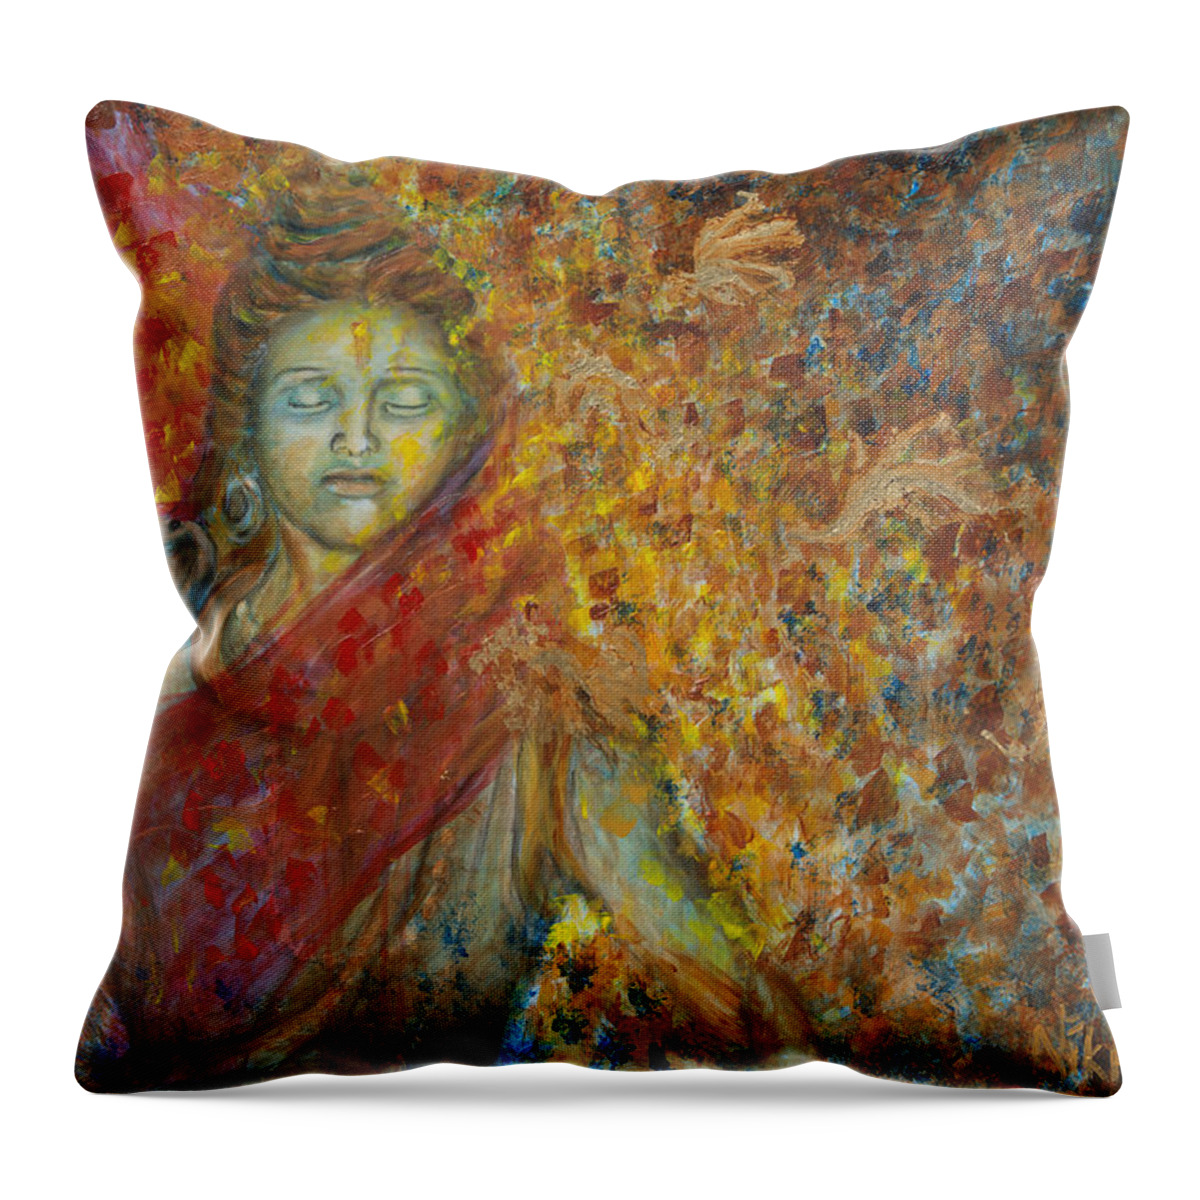 Shiva Throw Pillow featuring the painting Winds Of Change by Nik Helbig